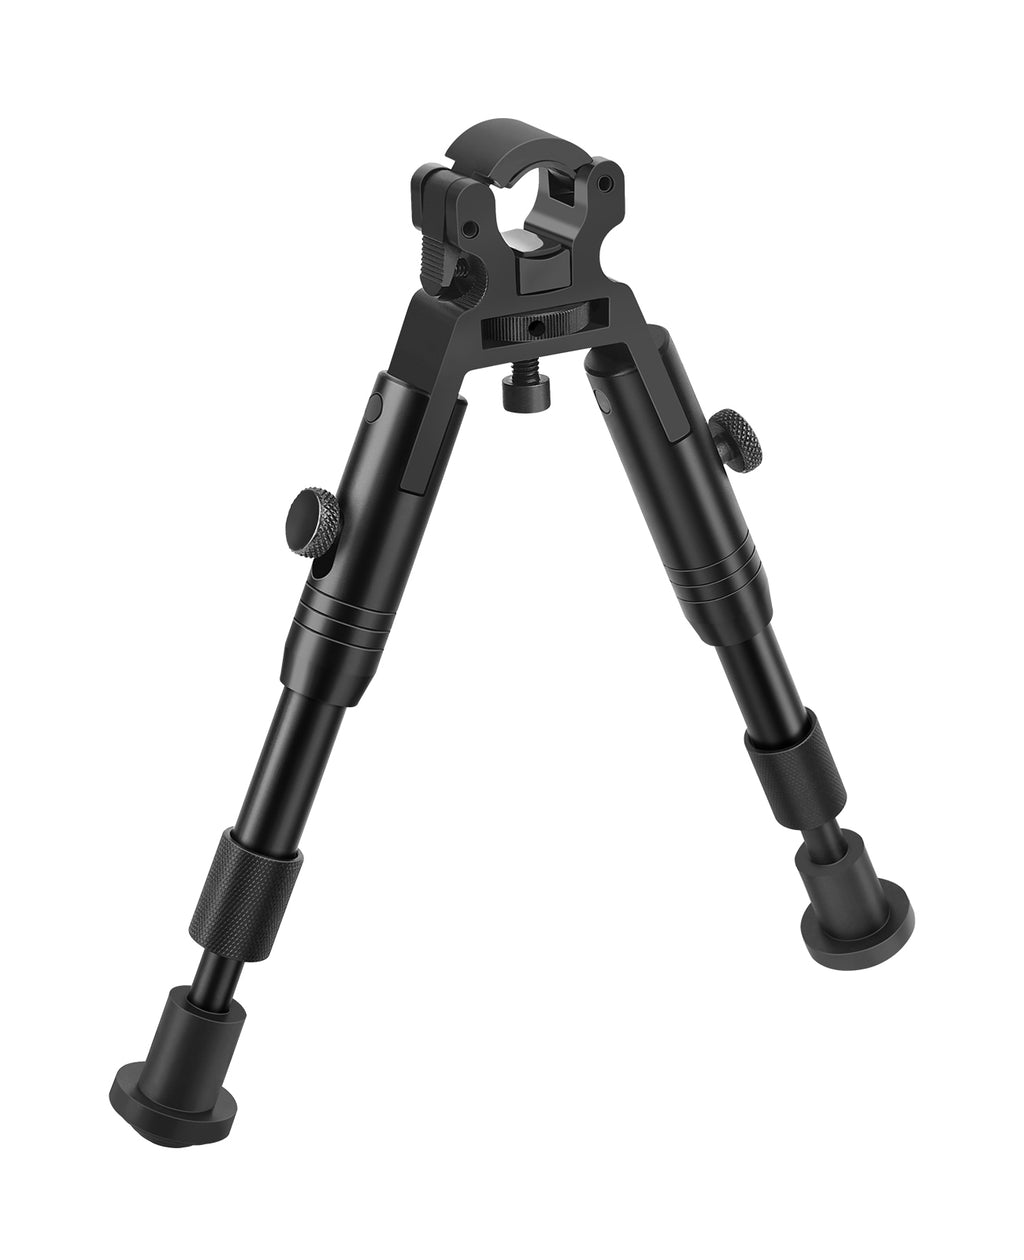 EZshoot 6-7 Inches Clamp-on Bipod for Rifle with Quick Release Design